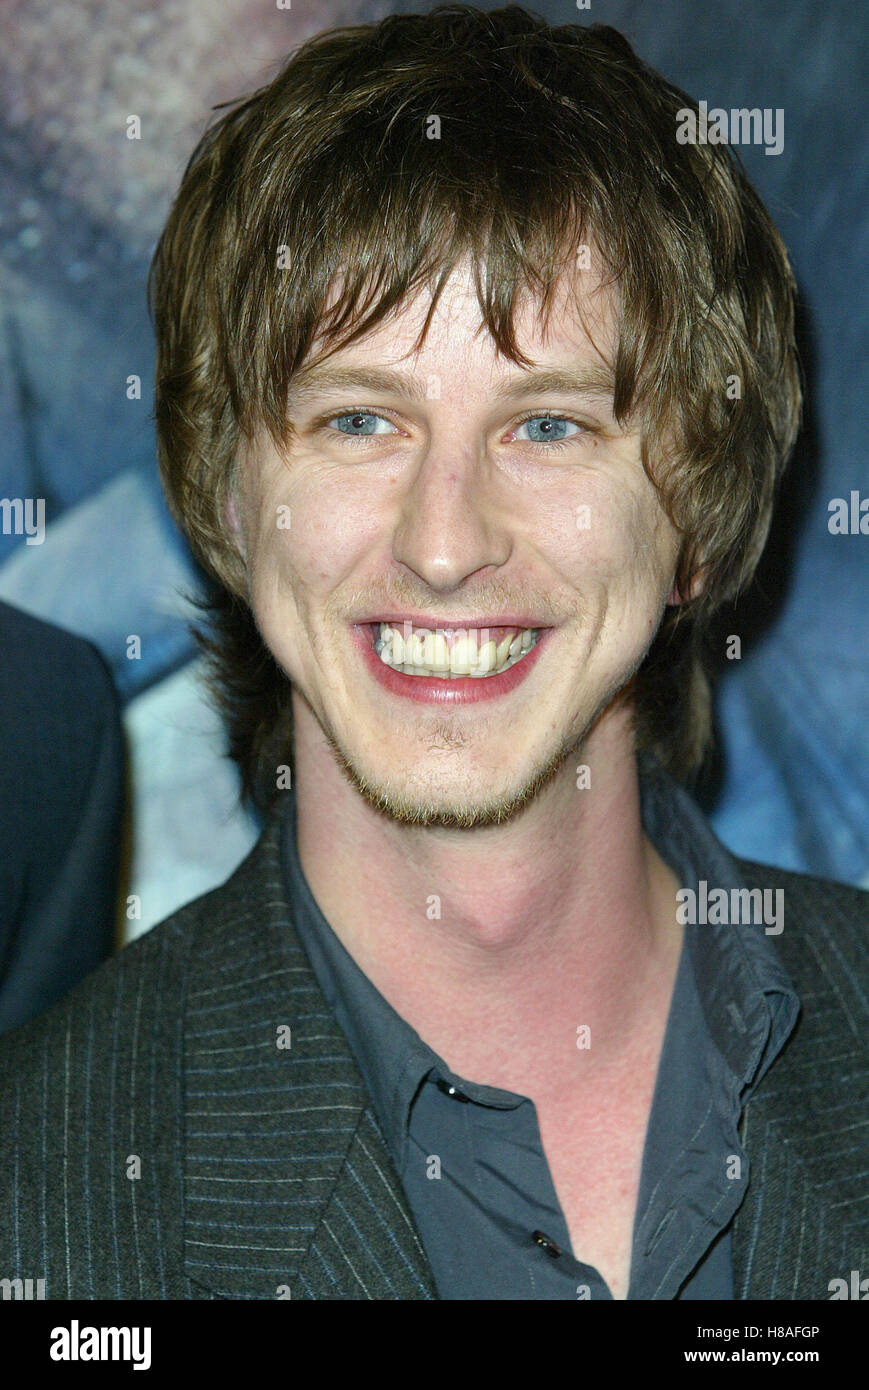 LEE INGLEBY MASTER & COMMANDER: THE FAR SI ACADEMY OF MOTION PICTURE ARTS BEVERLY HILLS LOS ANGELES U 11 November 2003 Stock Photo